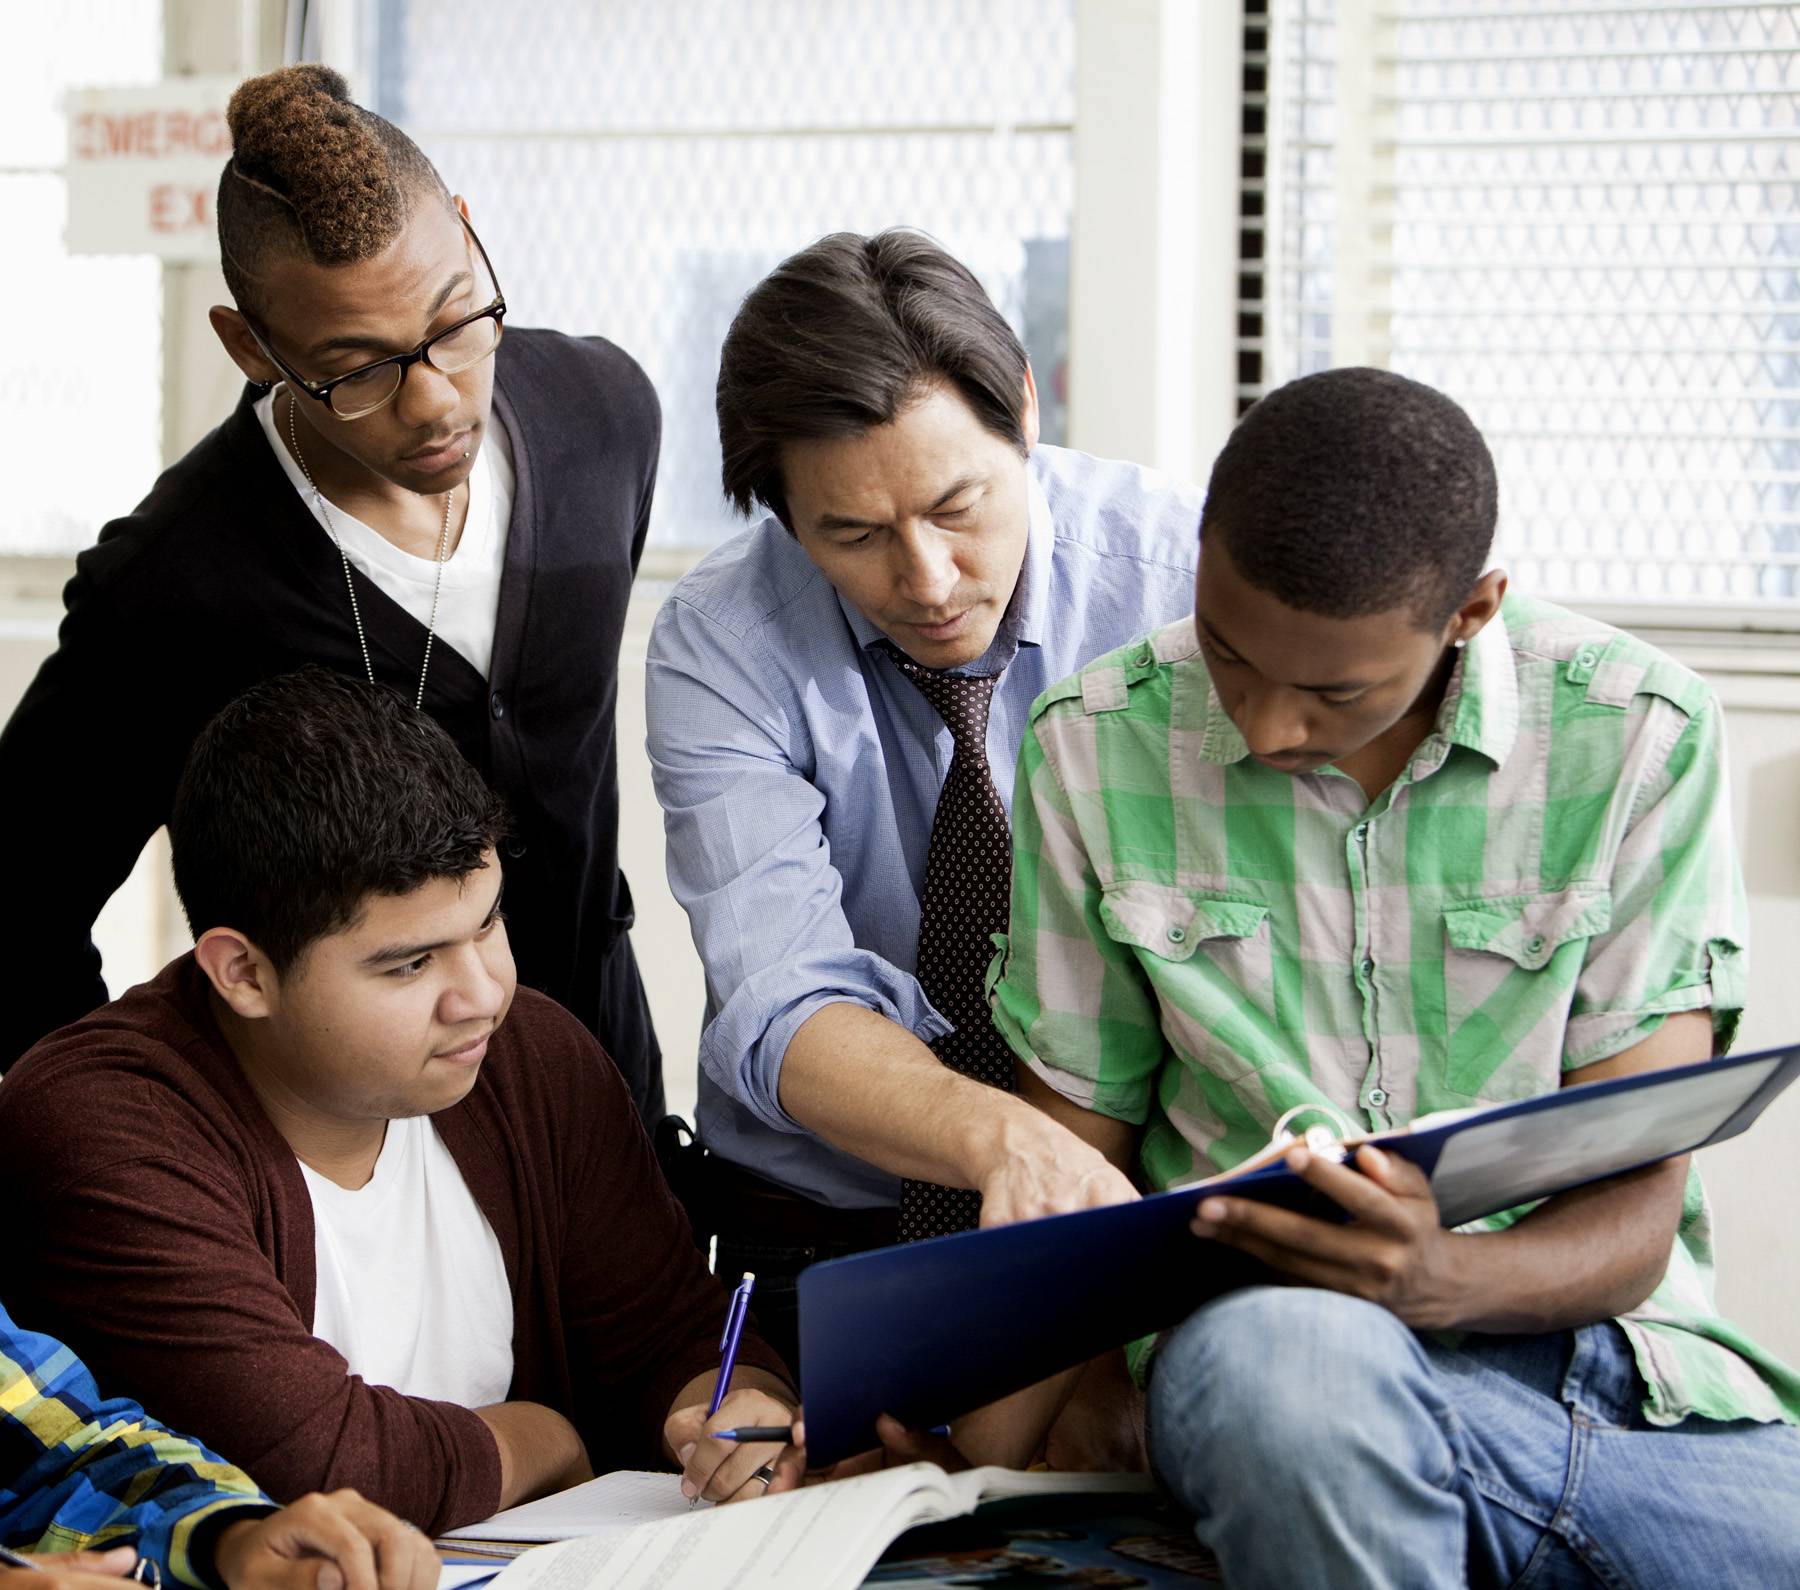 A Look at Black and Latino Males High School Performance